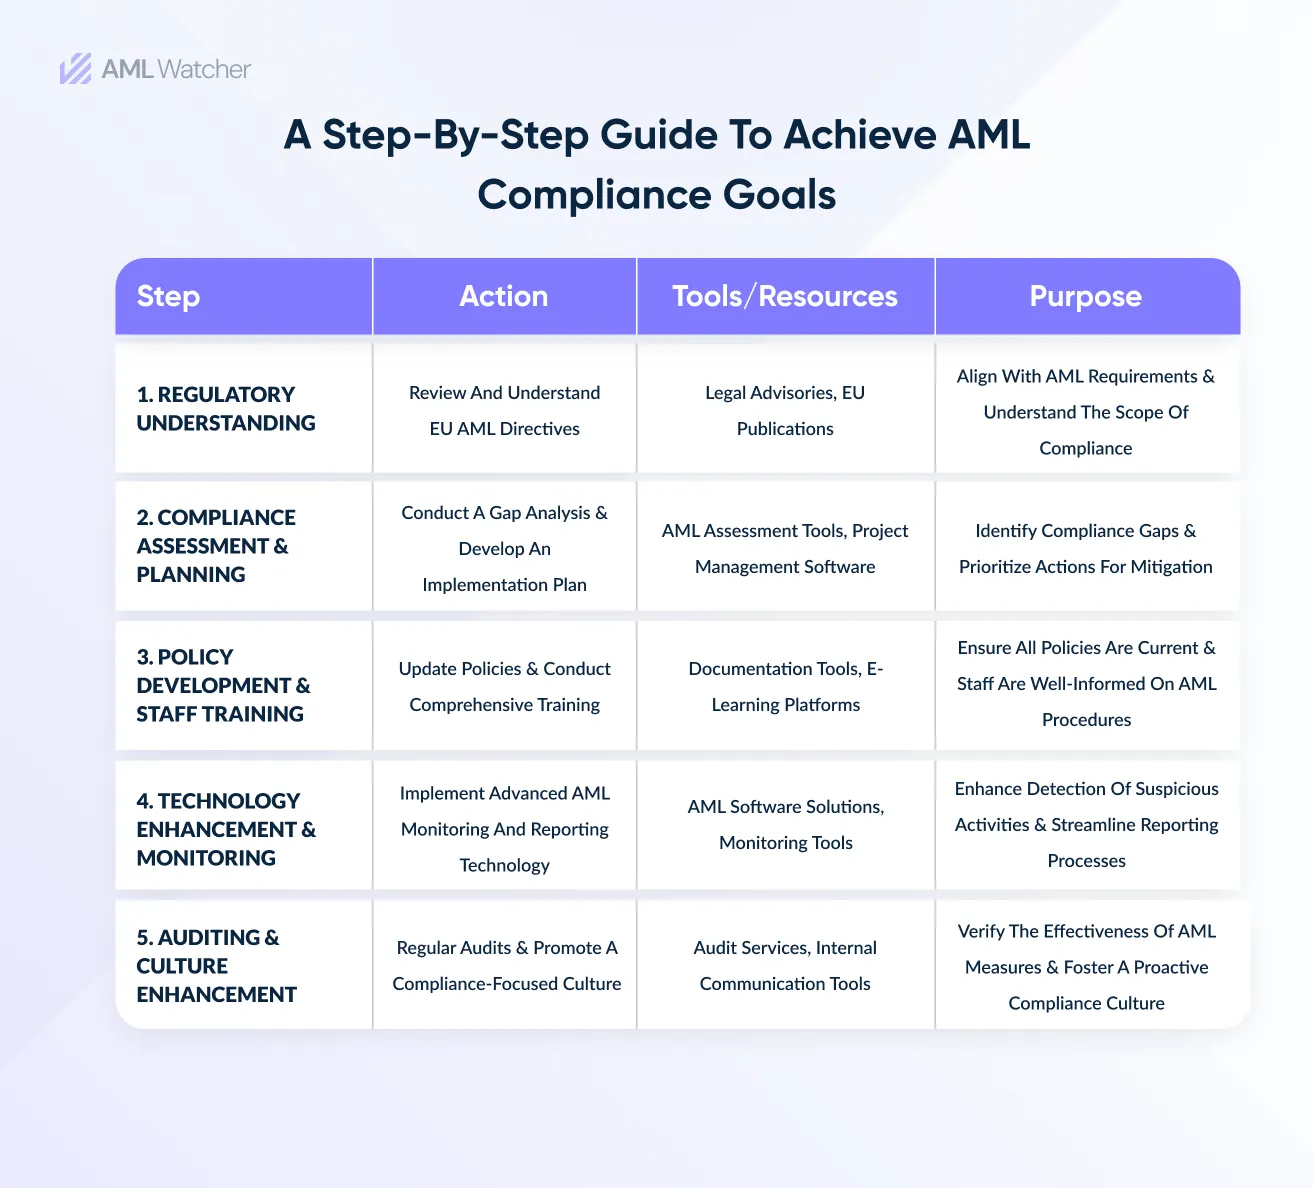 The featured image shows a pathway to achieve compliance goals. 